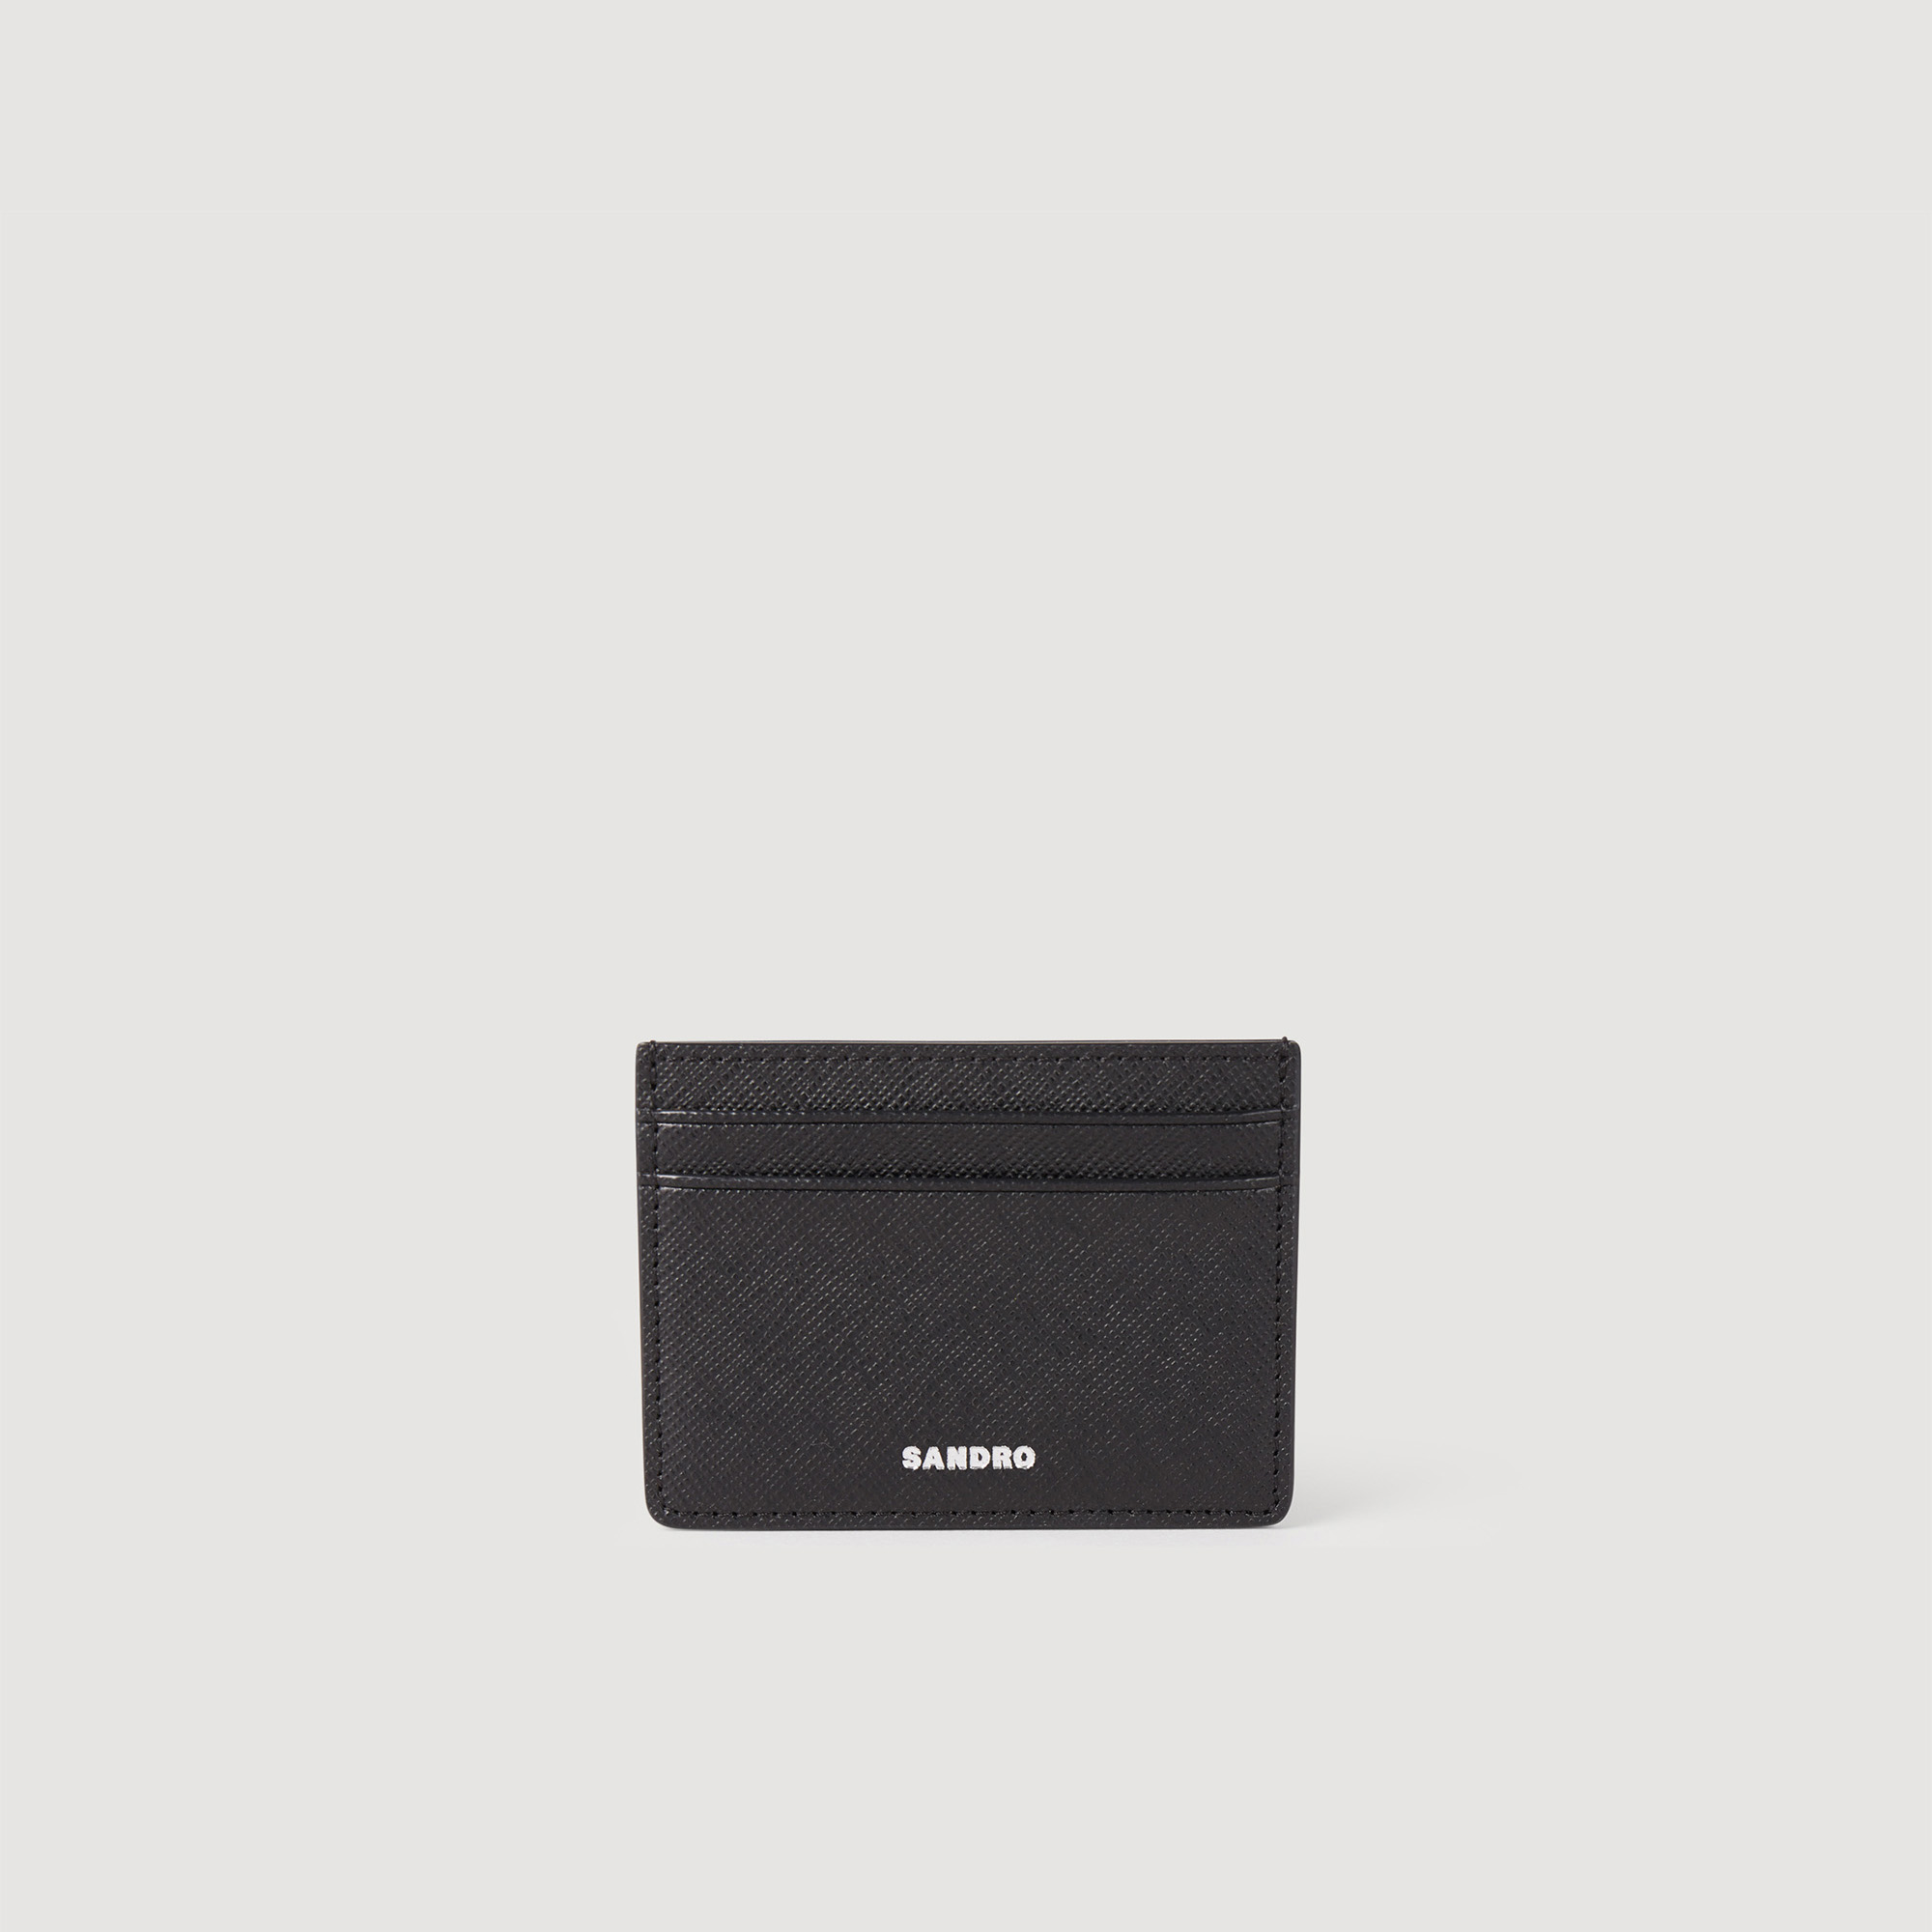 Sandro synderm Coating: Sandro men's leather card holder â€¢ Saffiano leather card holder â€¢ Four slots â€¢ One compartment â€¢ Embossed Sandro logo â€¢ Dimensions: 4 x 3 in By purchasing this product, you are supporting more responsible leather manufacturing via the Leather Working Group, which certifies tanneries based on their environmental performance (water, energy, waste, etc